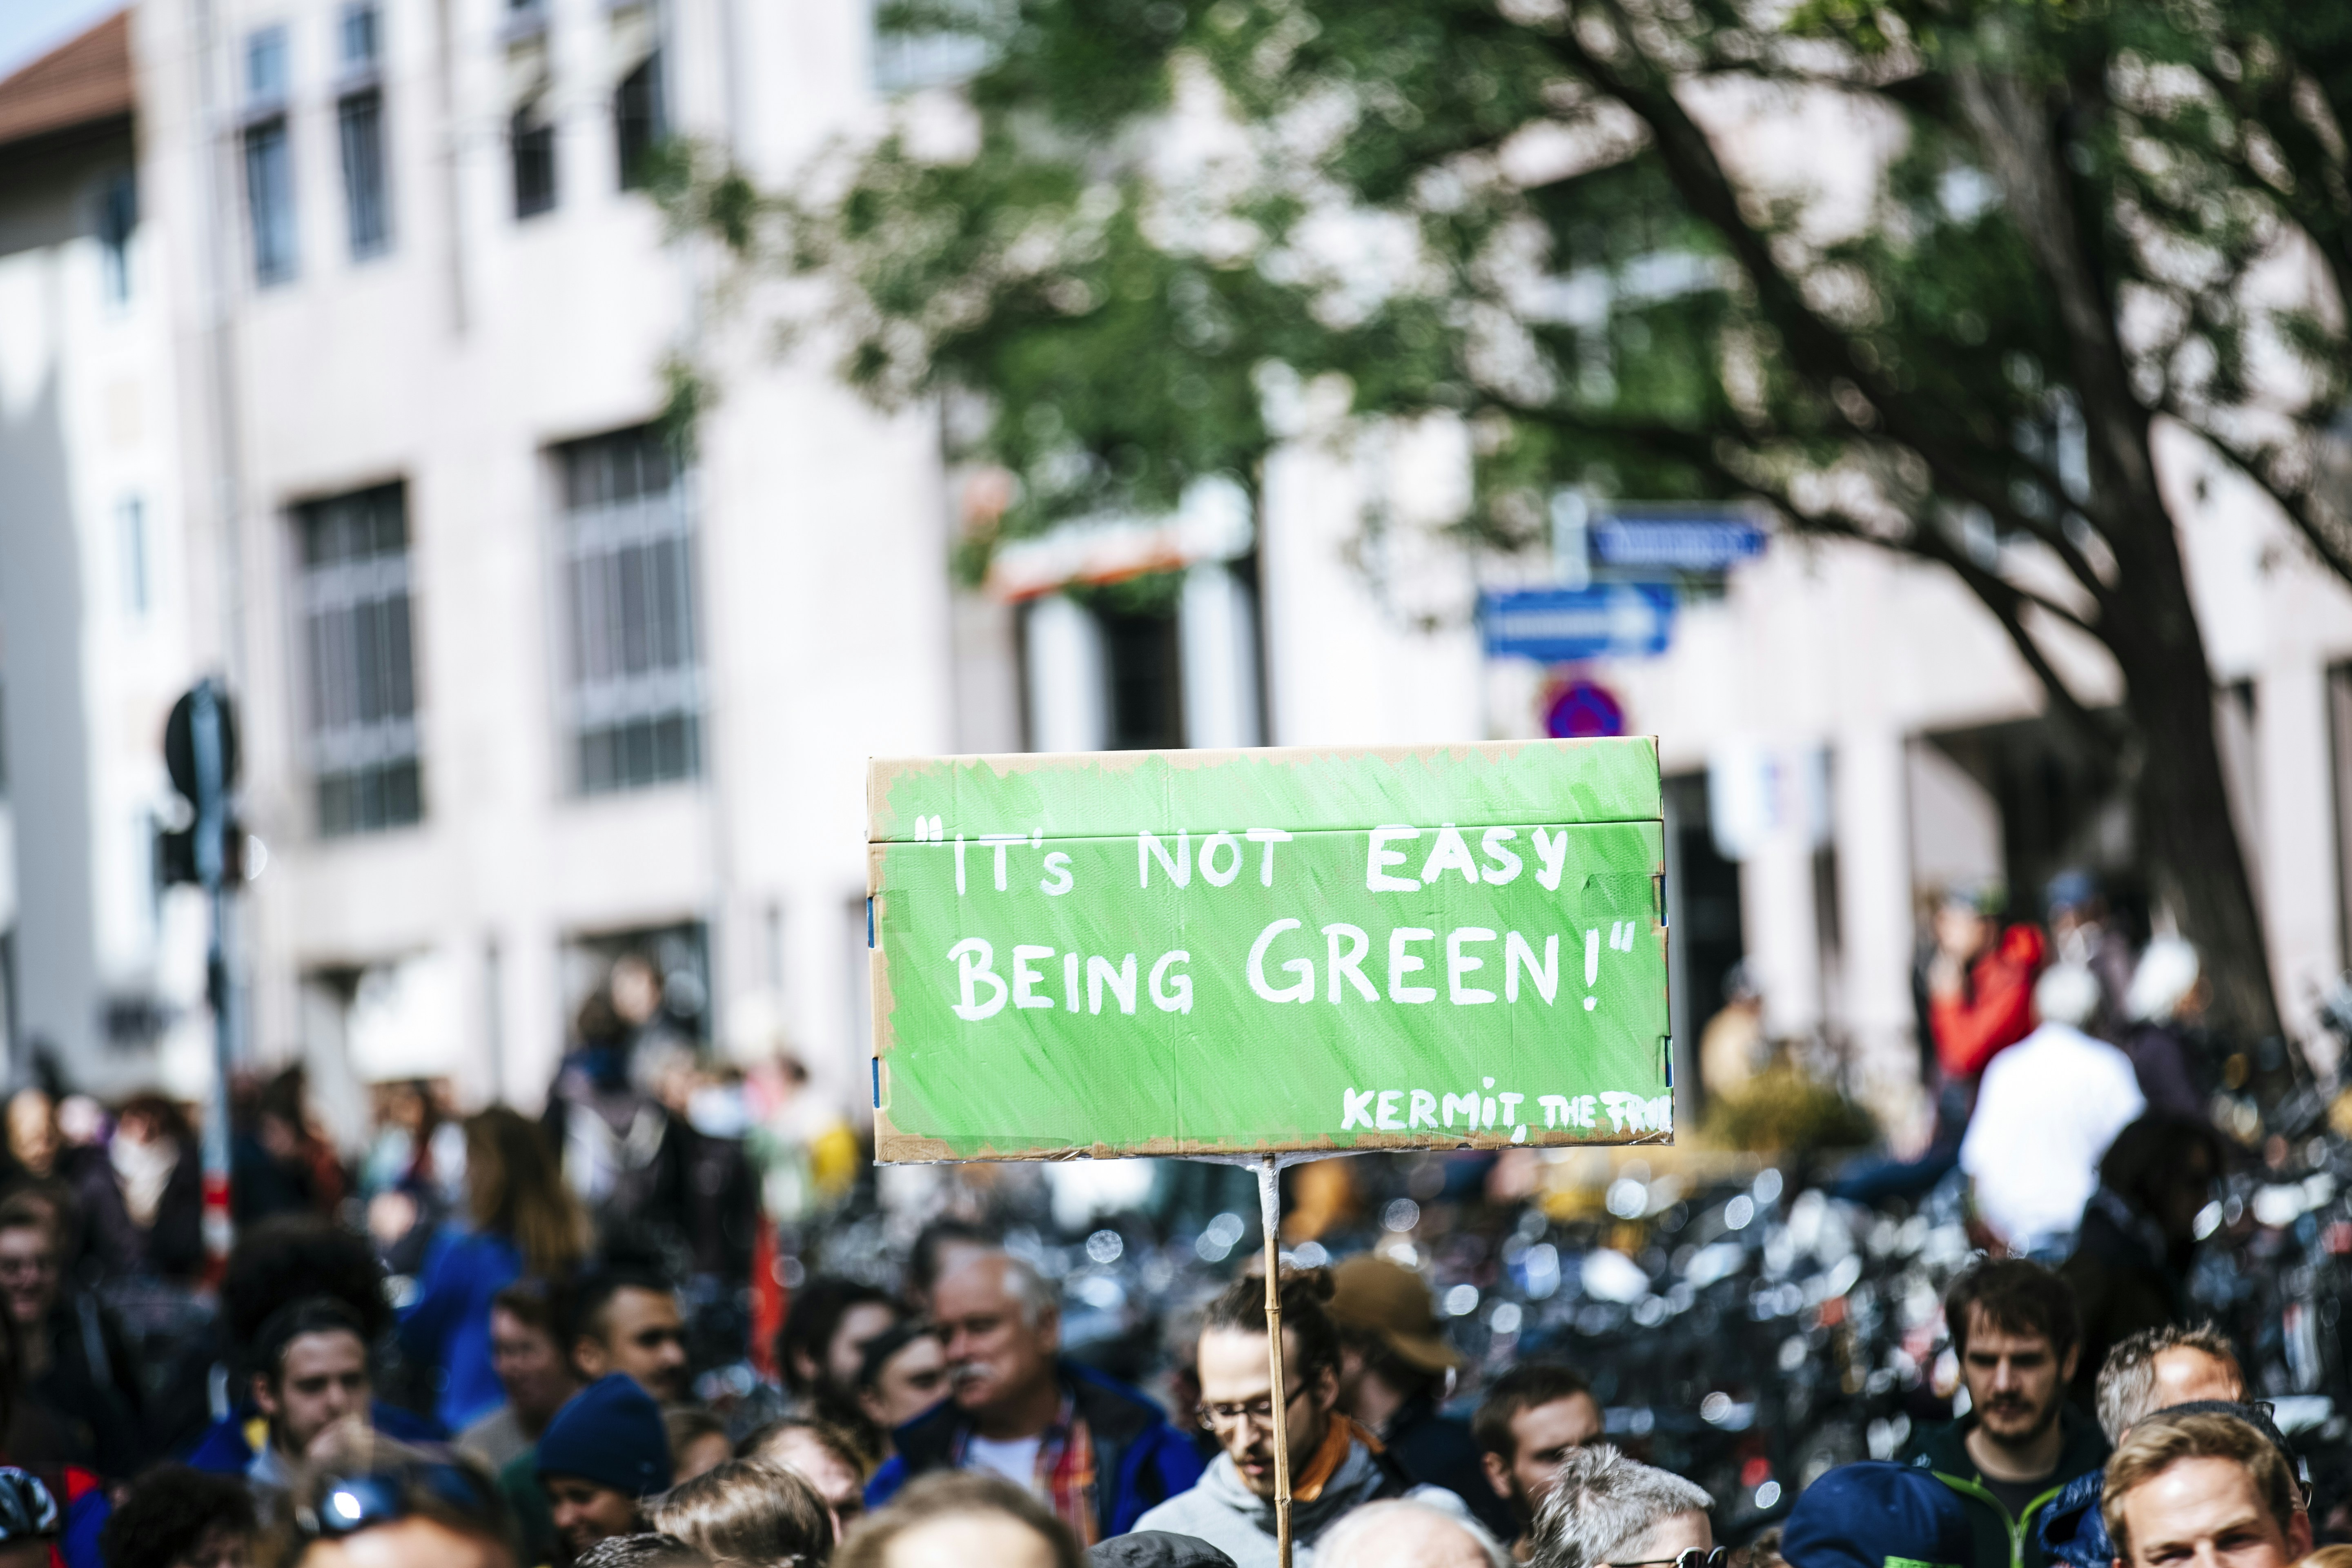 IT'S NOT EASY BEING GREEN _KERMIT THE FROG. Global climate change strike - No Planet B - 09-20-2019